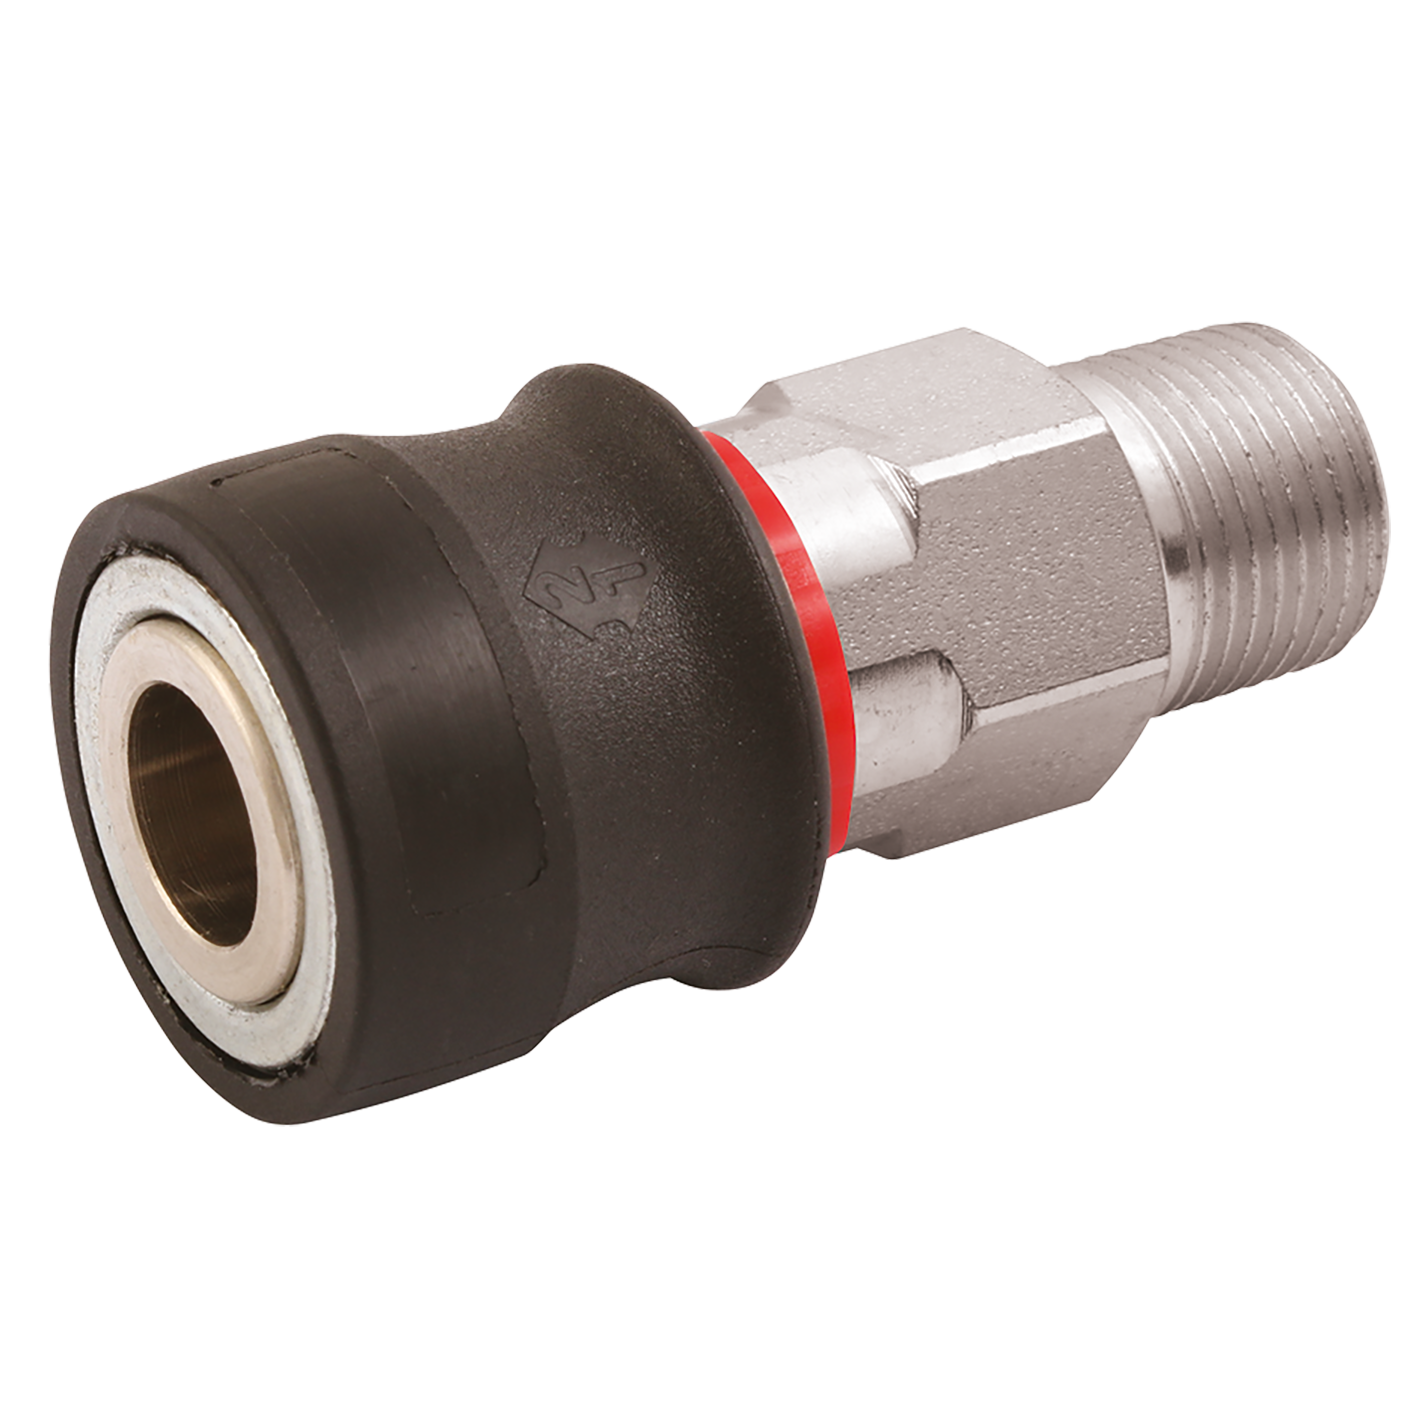 3/8" BSPT Male Safety Coupling